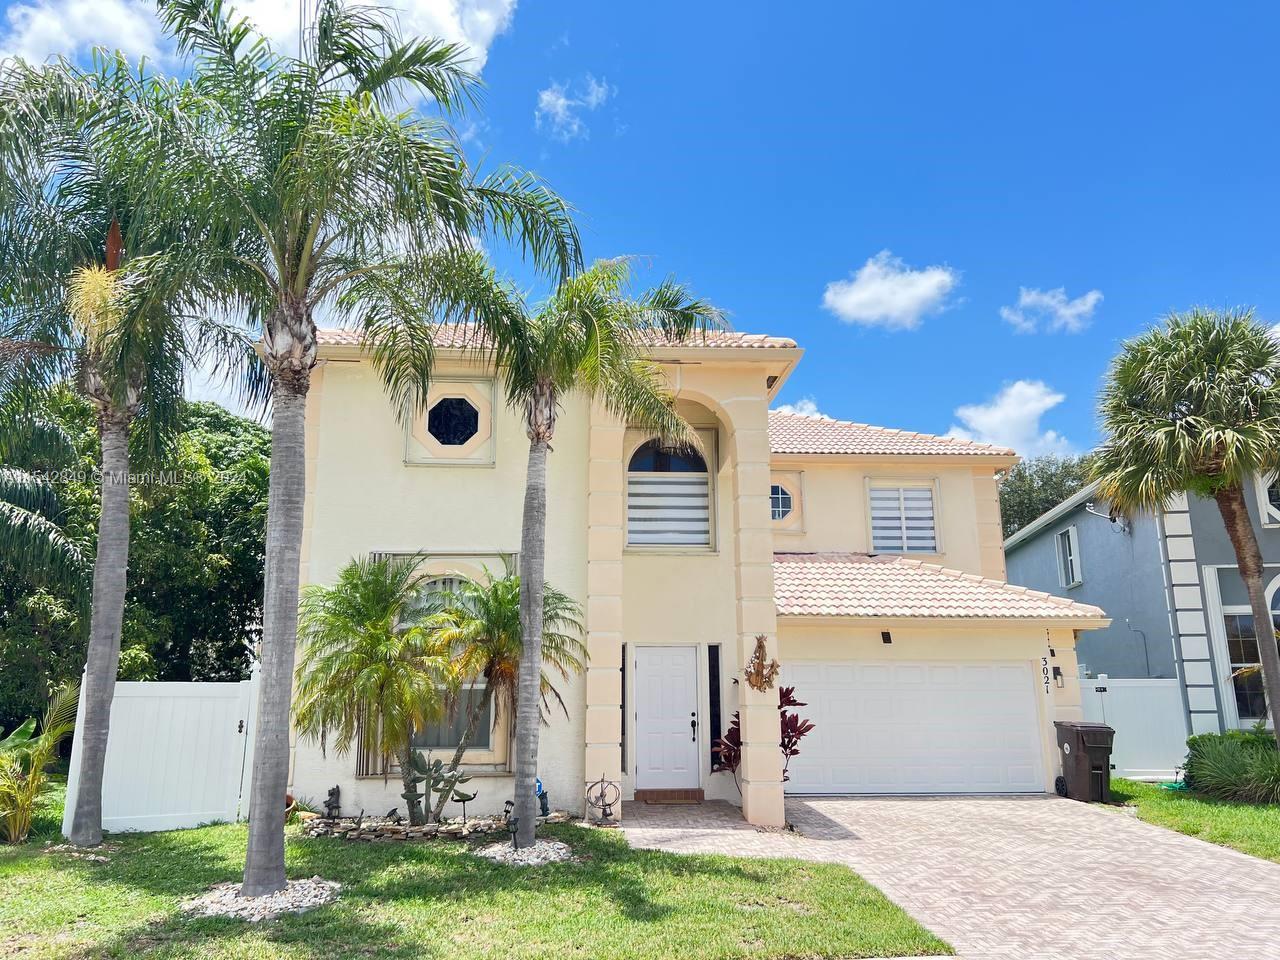 Property for Sale at 3021 El Camino Real, West Palm Beach, Palm Beach County, Florida - Bedrooms: 5 
Bathrooms: 4  - $683,100